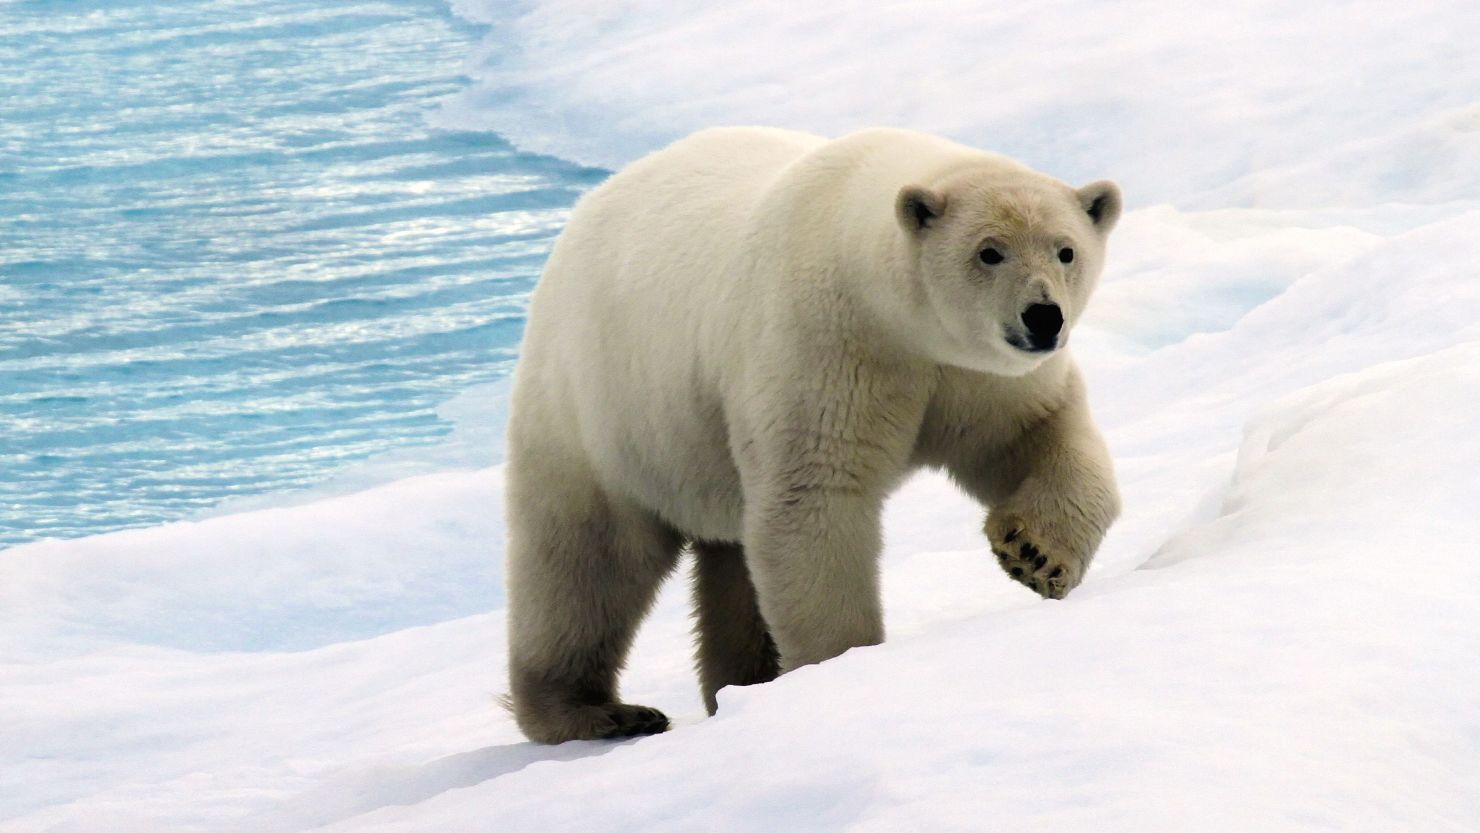 Arctic sea ice is a vital habitat for the polar bear. Photo: Expedition Voyage Consulting/EYOS Expeditions